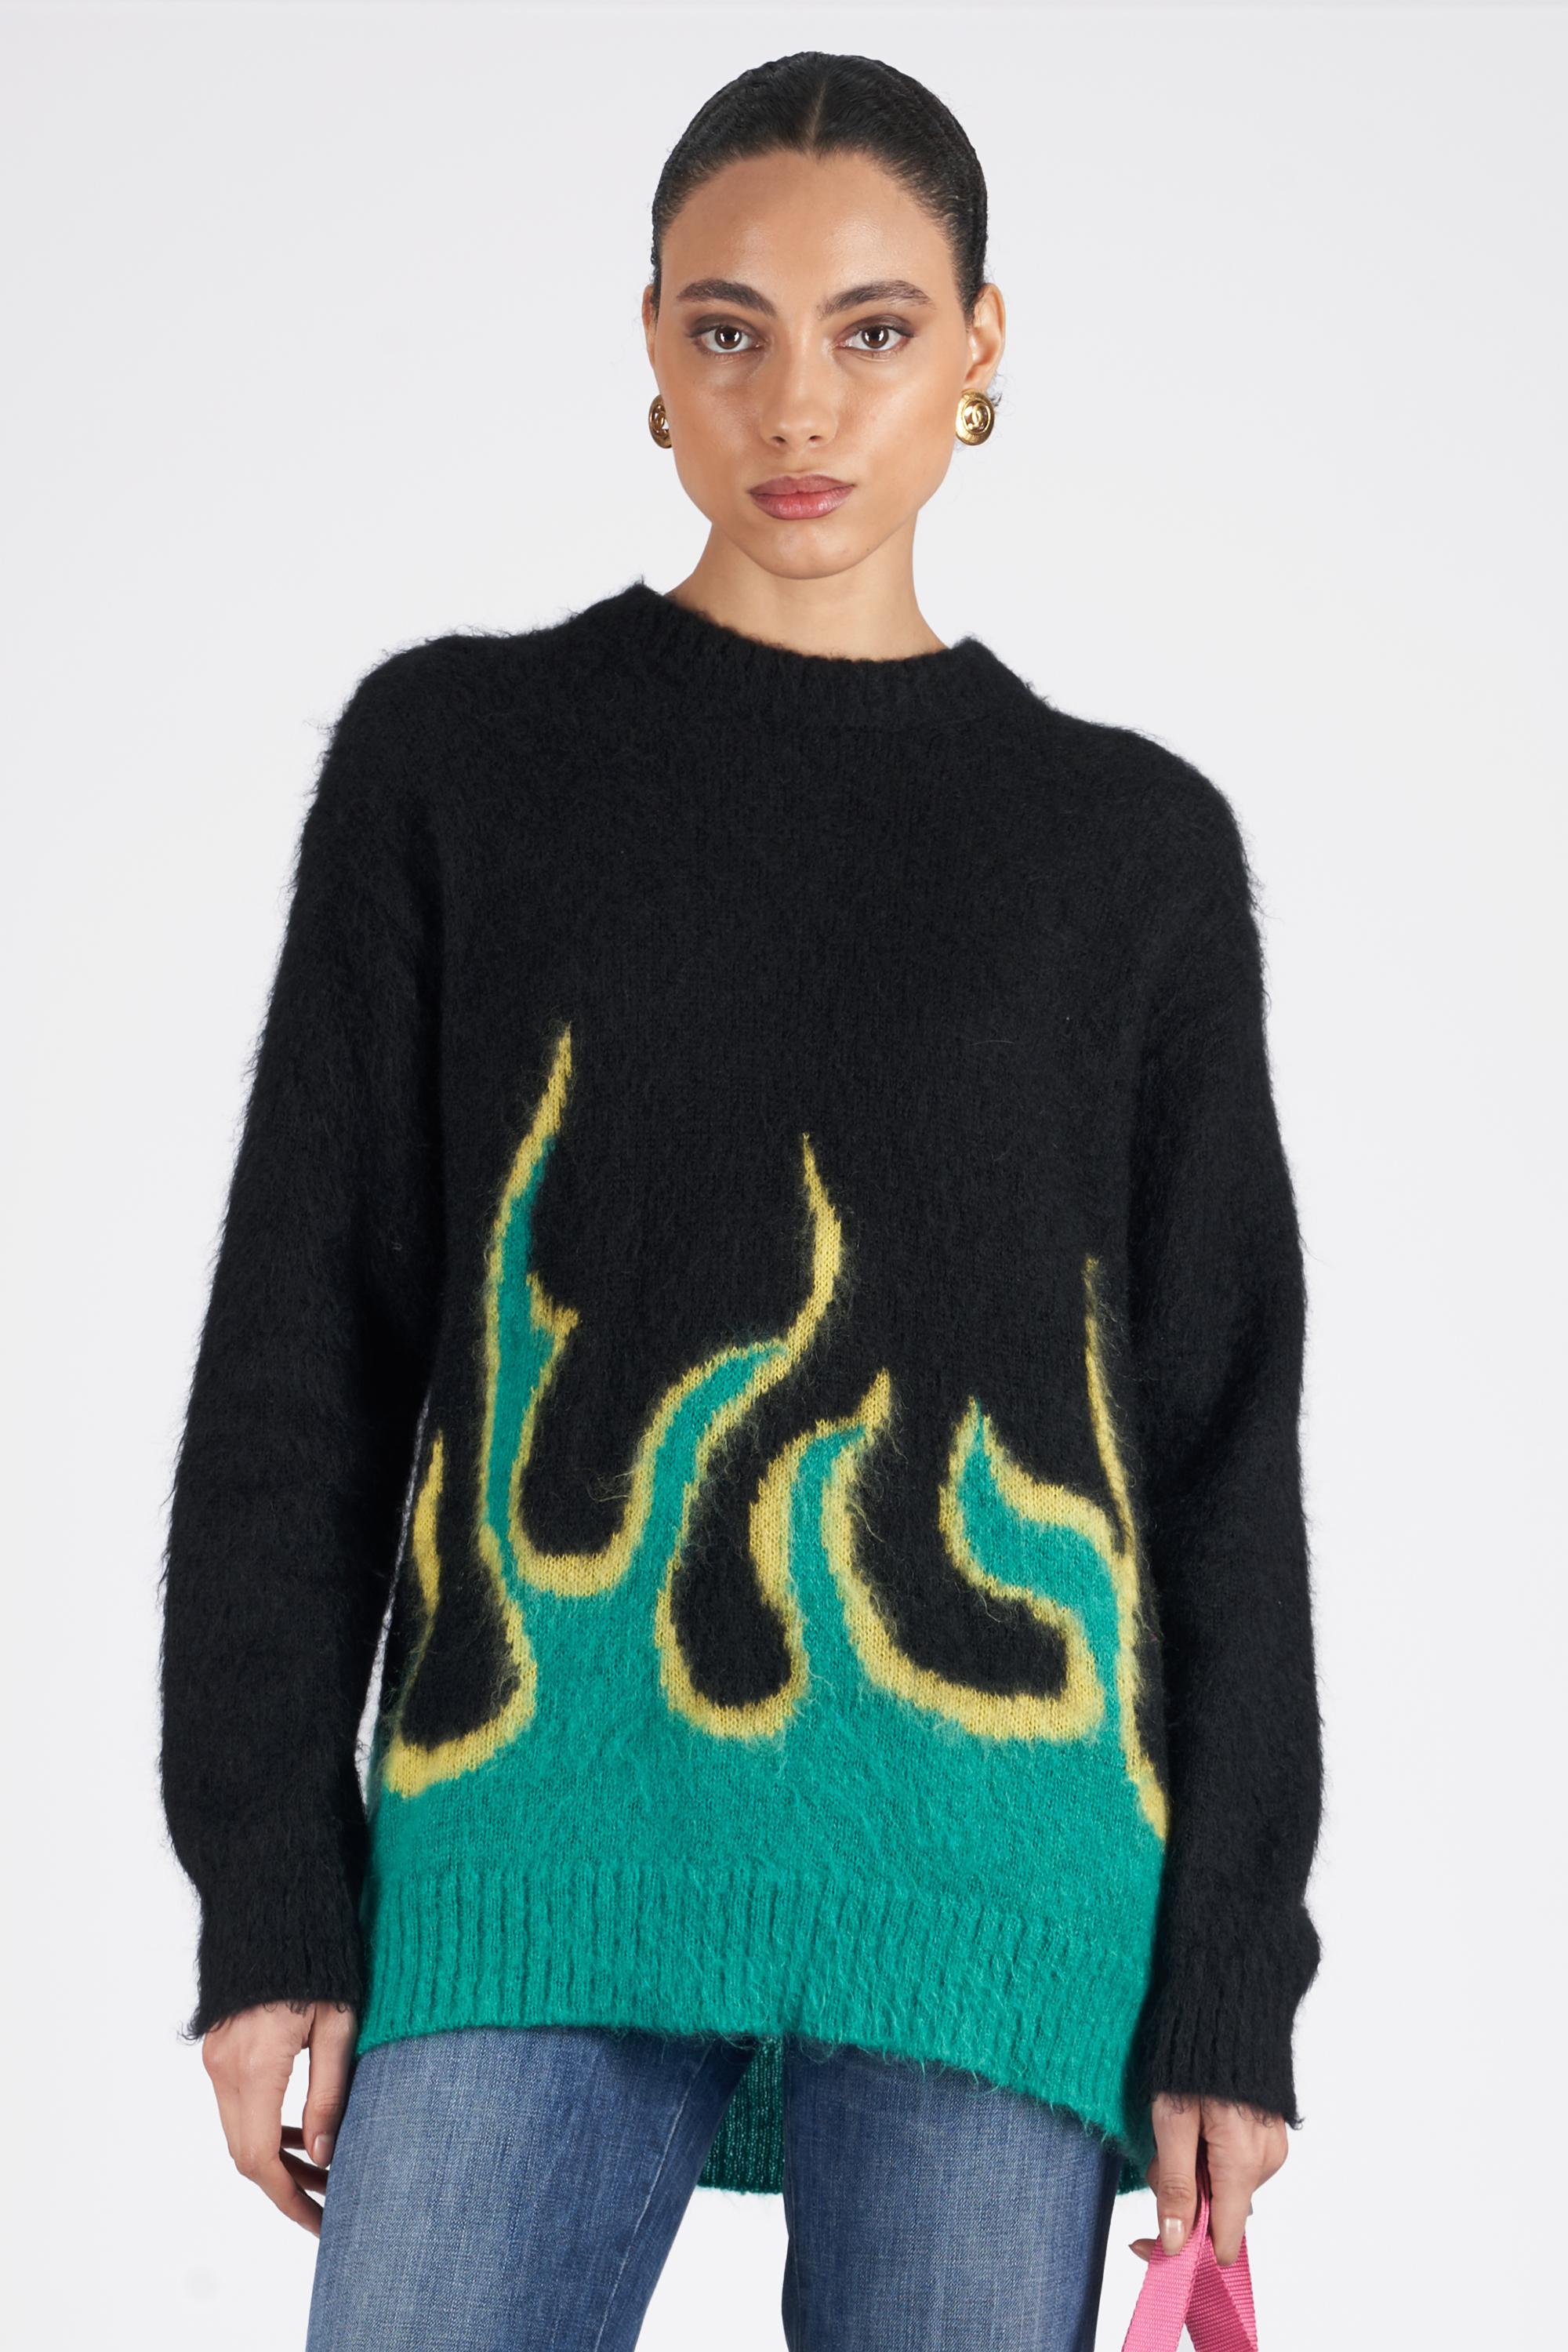 We are excited to present this runway Prada 2018 black knitted oversized jumper. Features green and yellow flame on the hem. In excellent vintage condition. Print as seen on the 2018 runway and worn by Kaia Gerber. Authenticity guaranteed.

Label